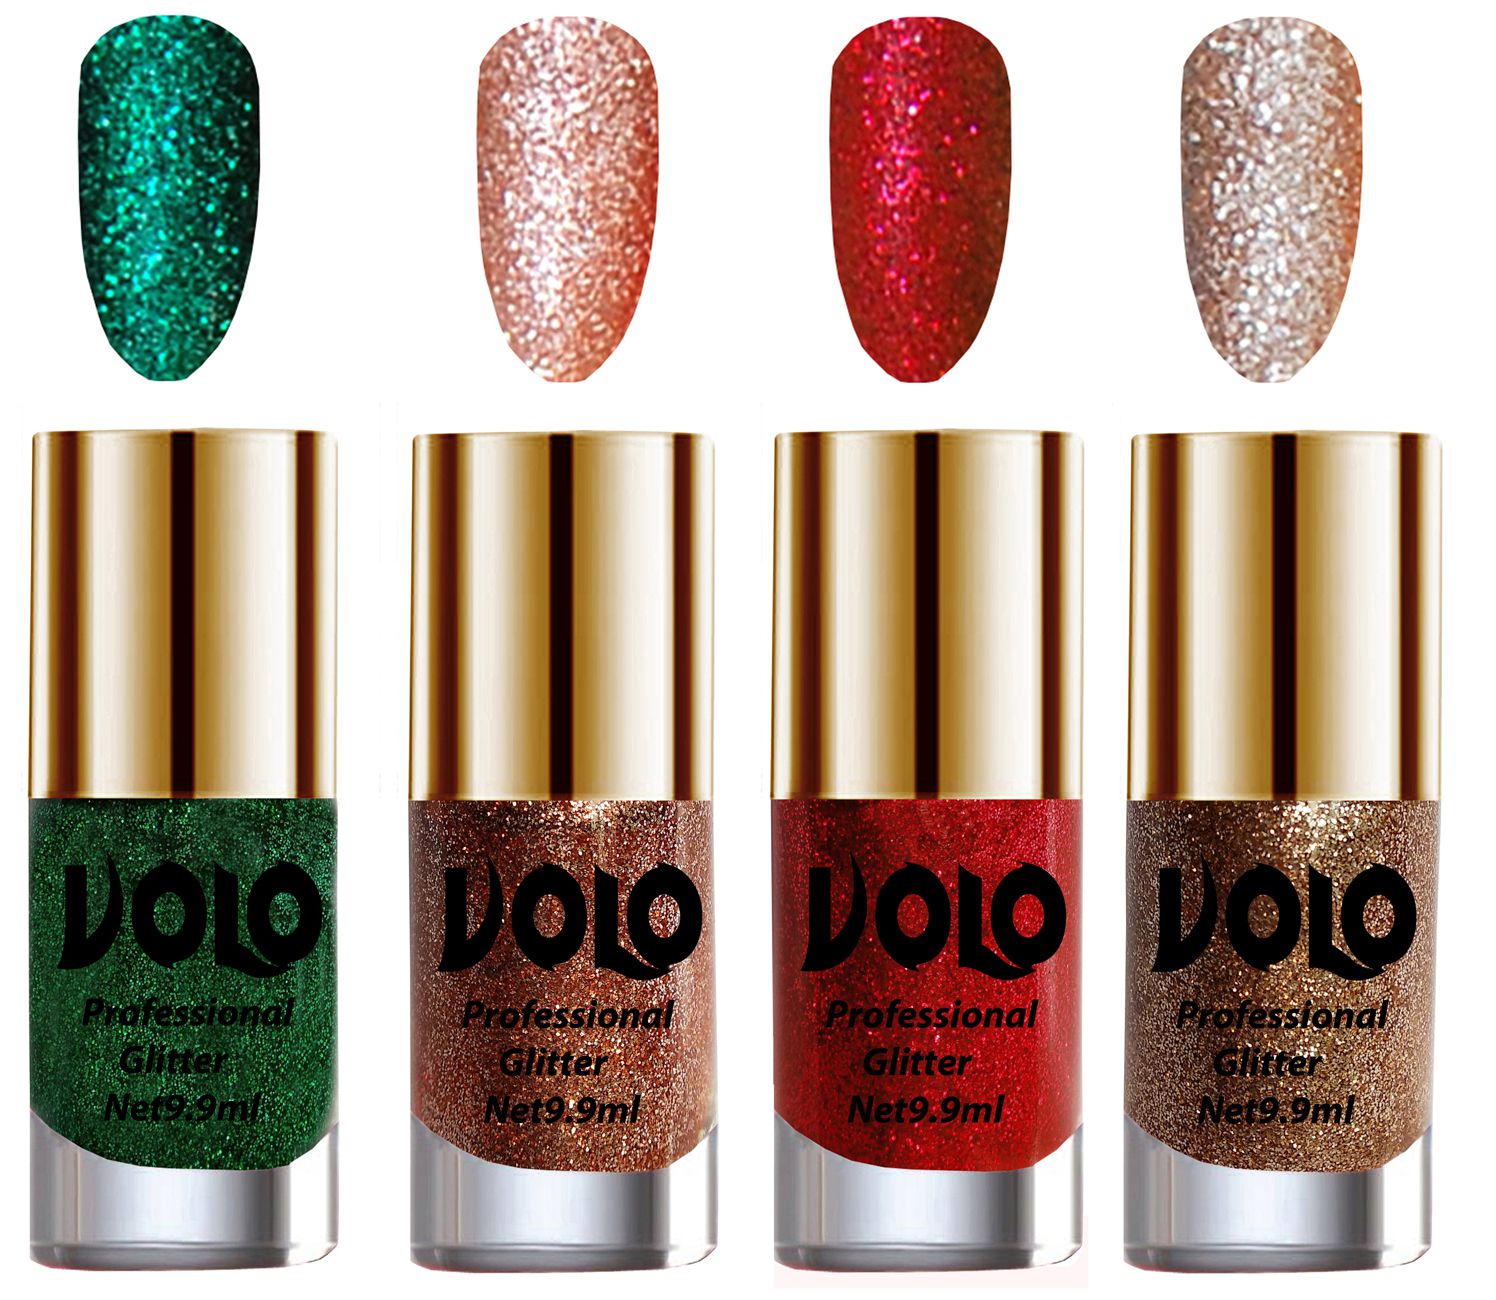     			VOLO Professionally Used Glitter Shine Nail Polish Green,Peach,Red Gold Pack of 4 39 mL